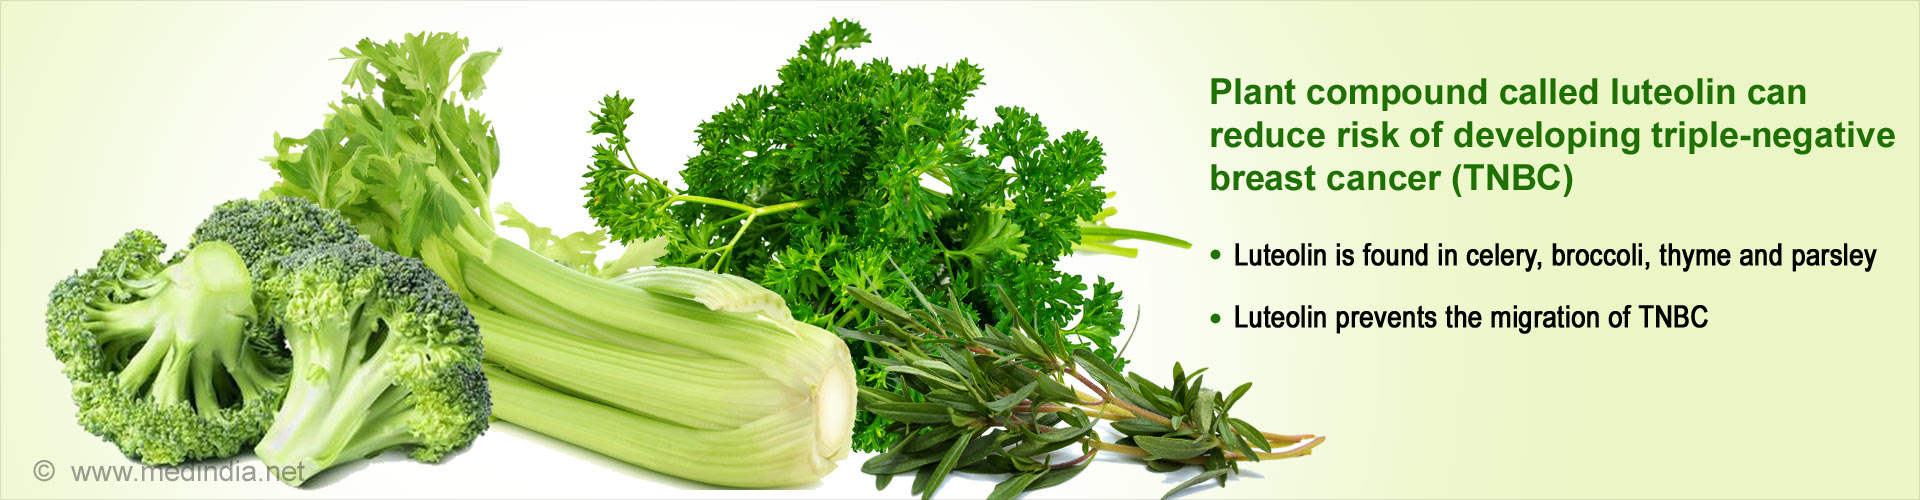 Plant compound called luteolin can reduce risk of developing triple-negative breast cancer (TNBC)
- Luteolin is found in celery, broccoli, thyme and parsley
- Luteolin prevents the migration of TNBC